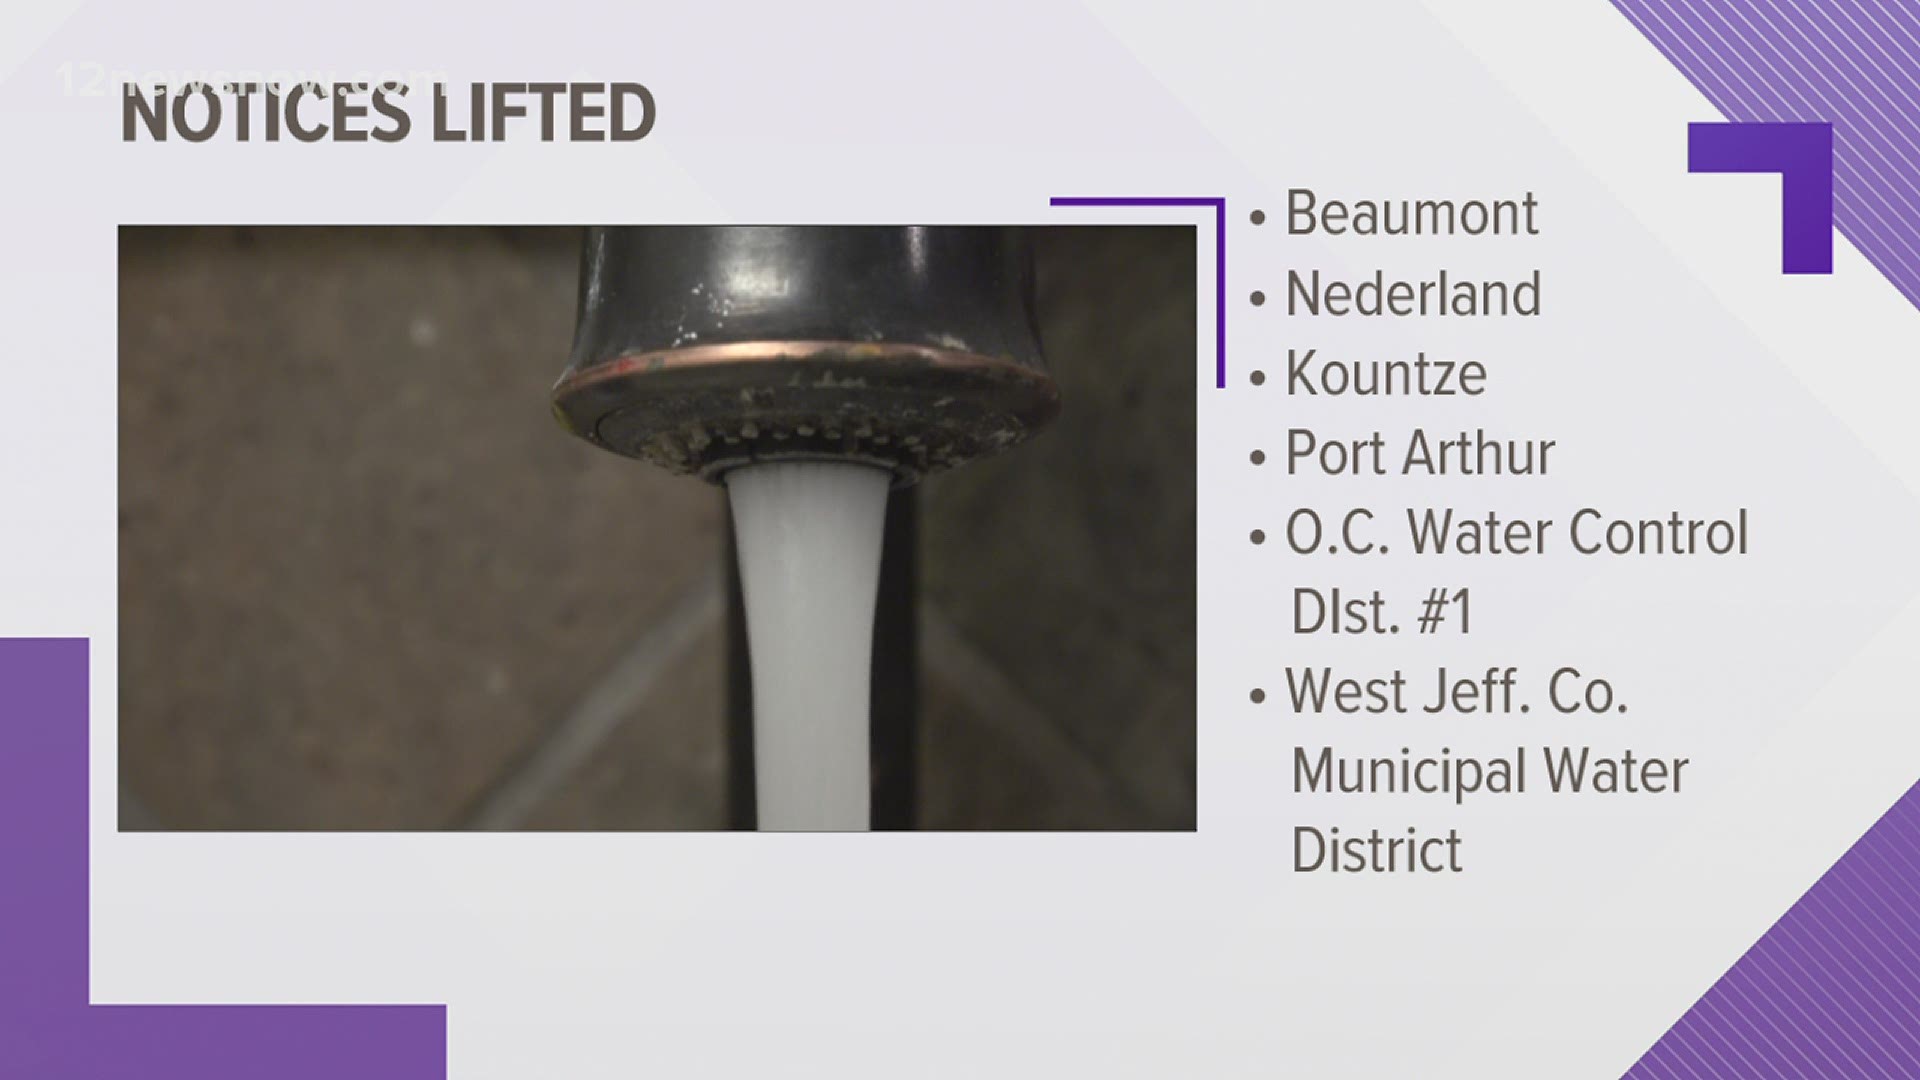 Beaumont has lifted its boil water notice, along with other cities in Southeast Texas.